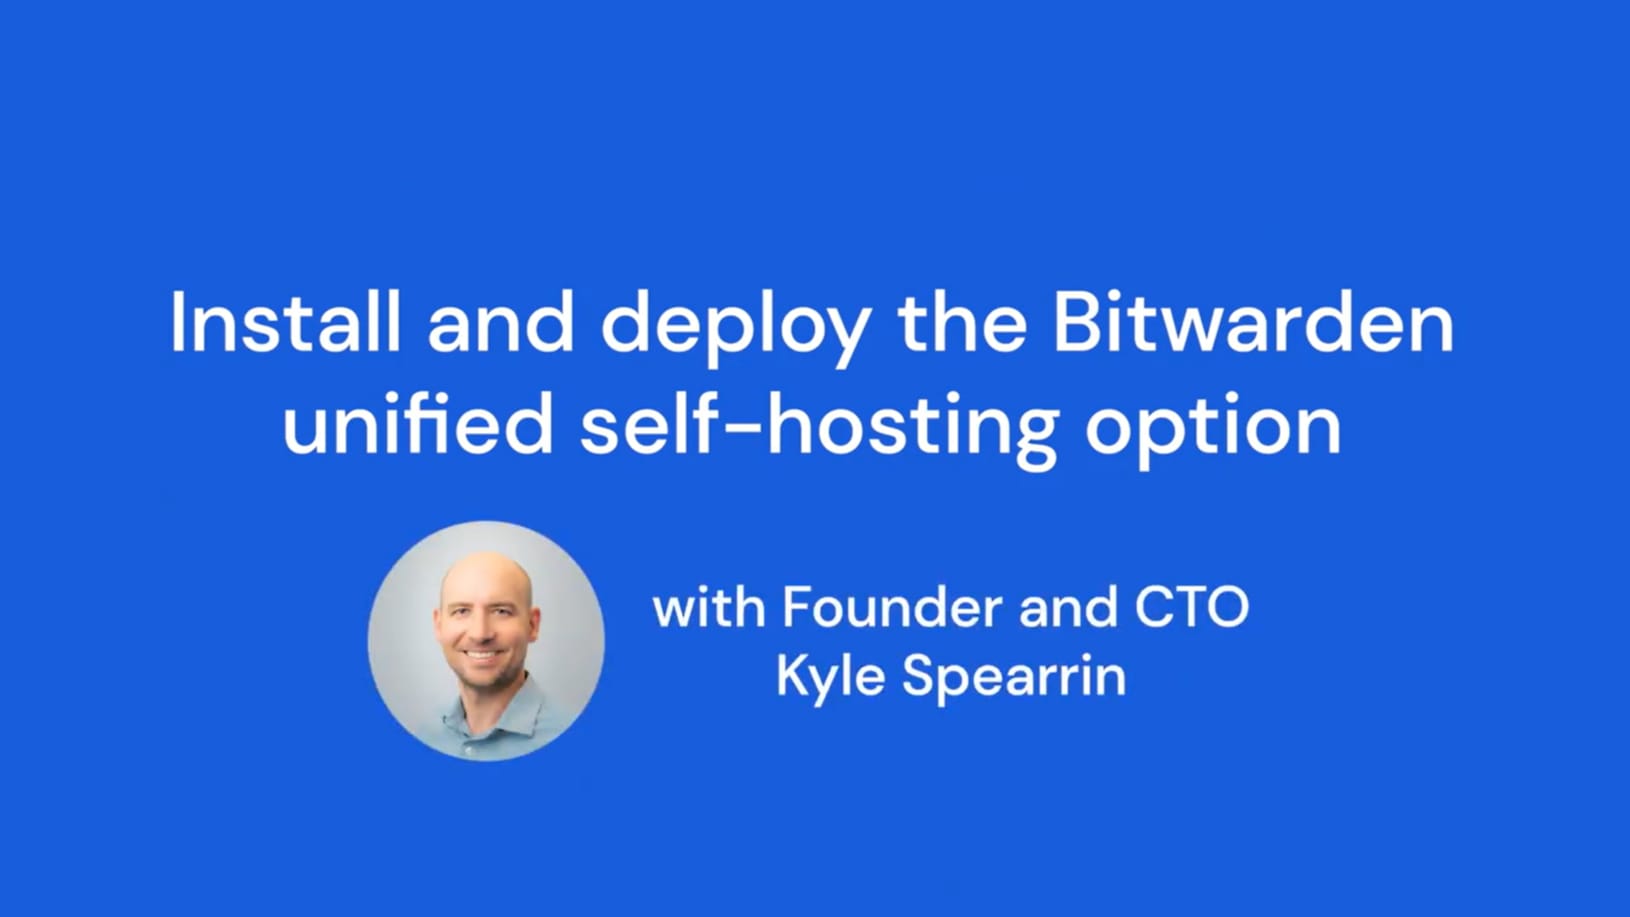 Install and deploy the Bitwarden unified self-hosting option with founder, Kyle Spearrin - Learn how to deploy the Bitwarden unified self-hosting option in this demo with Bitwarden founder and CTO, Kyle Spearrin! 